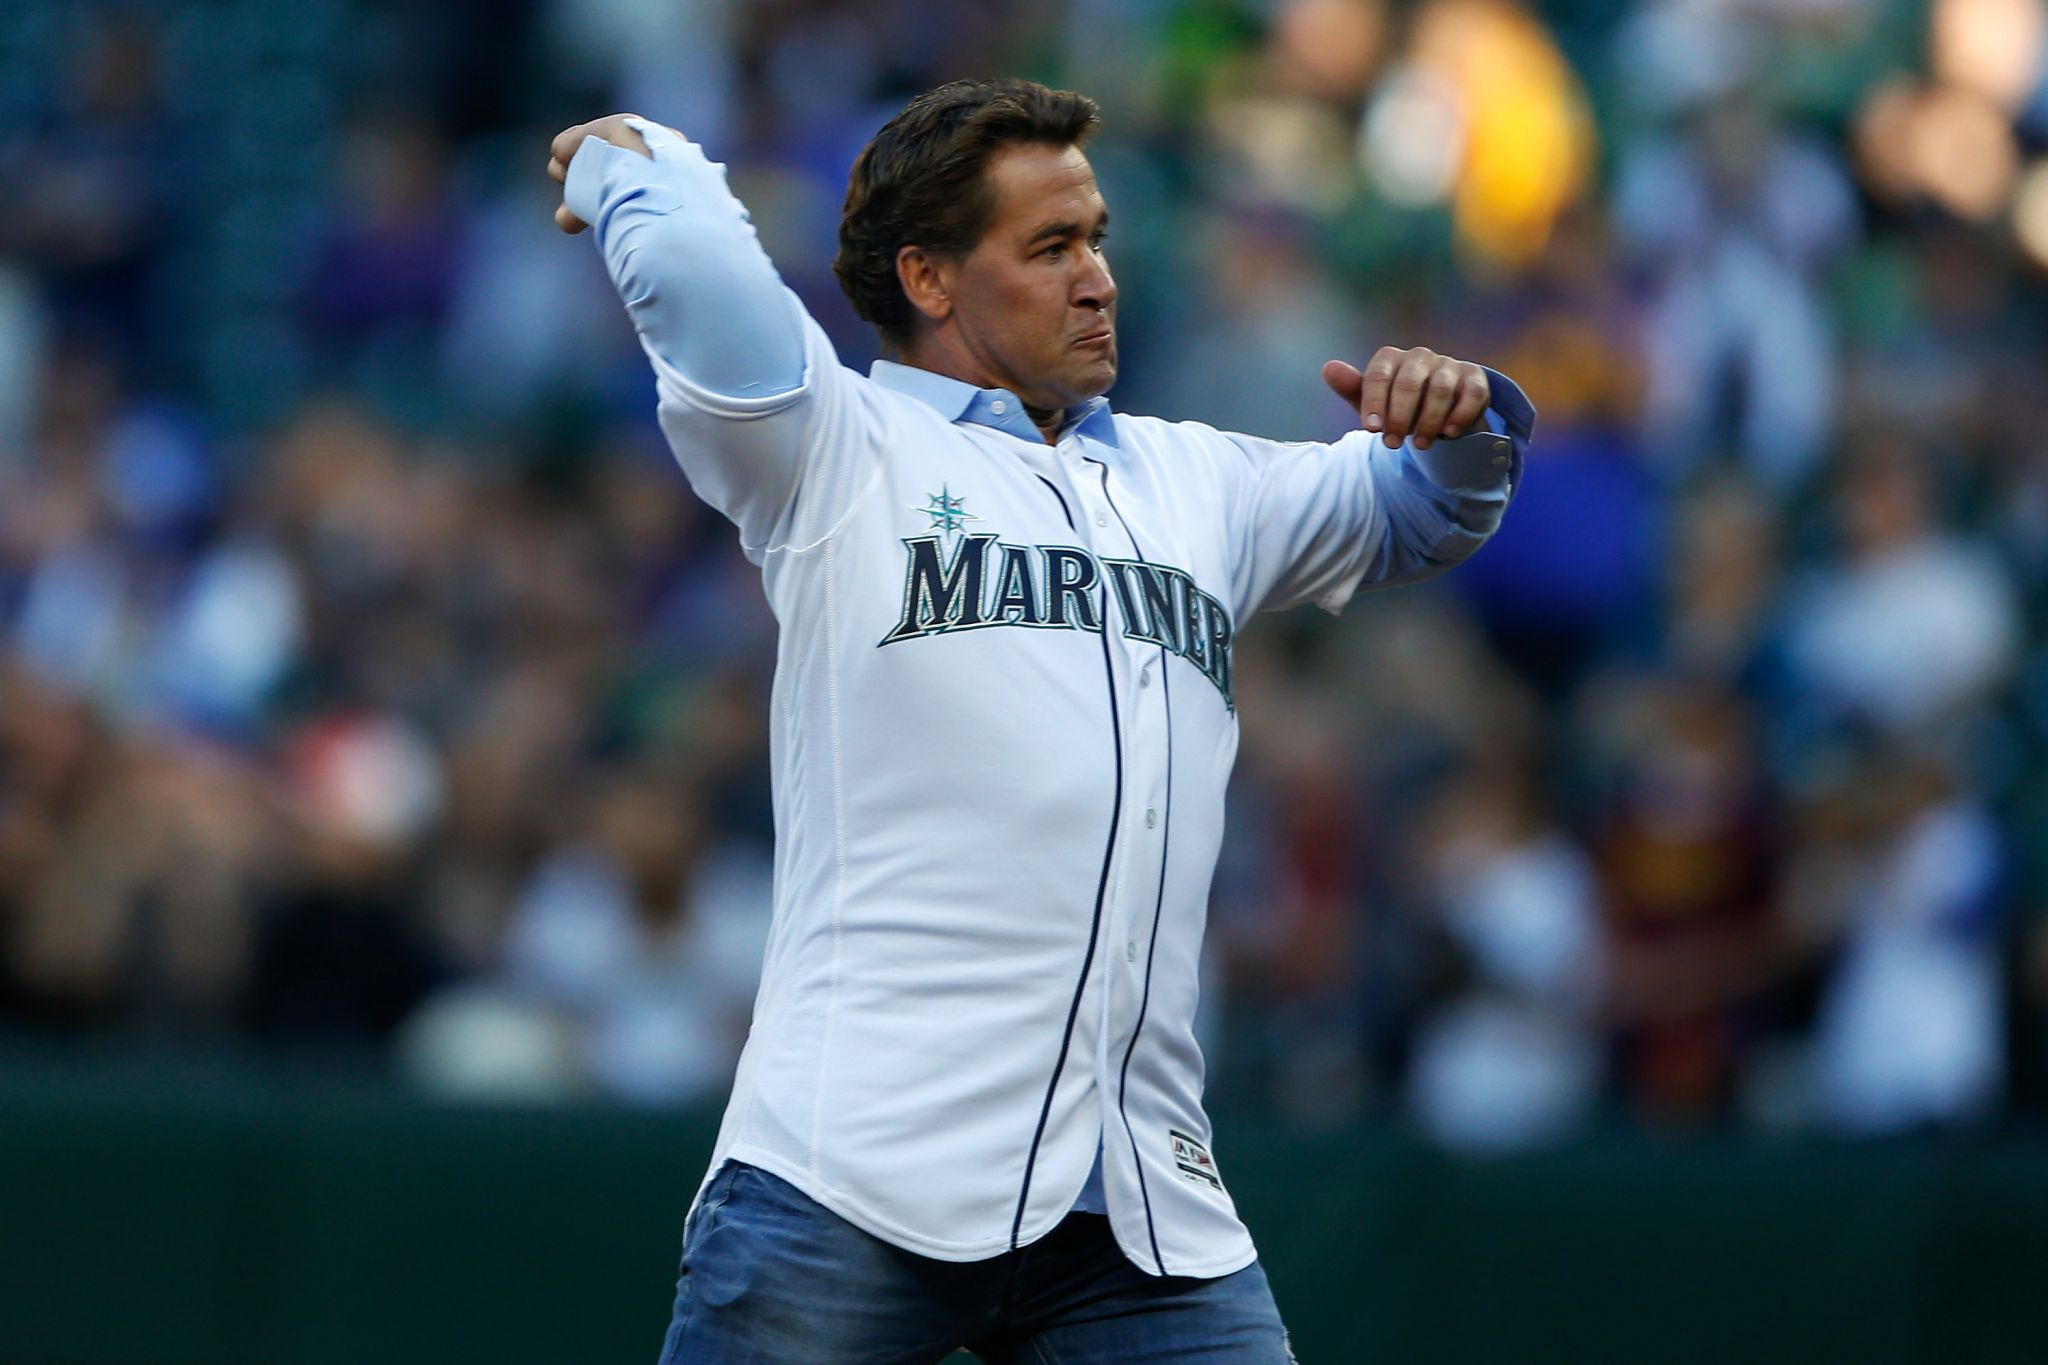 Bret Boone on X: Good luck to the @Mariners! Almost game time! #SeaUsRise  #WHEREiROOT #BooneApproved  / X